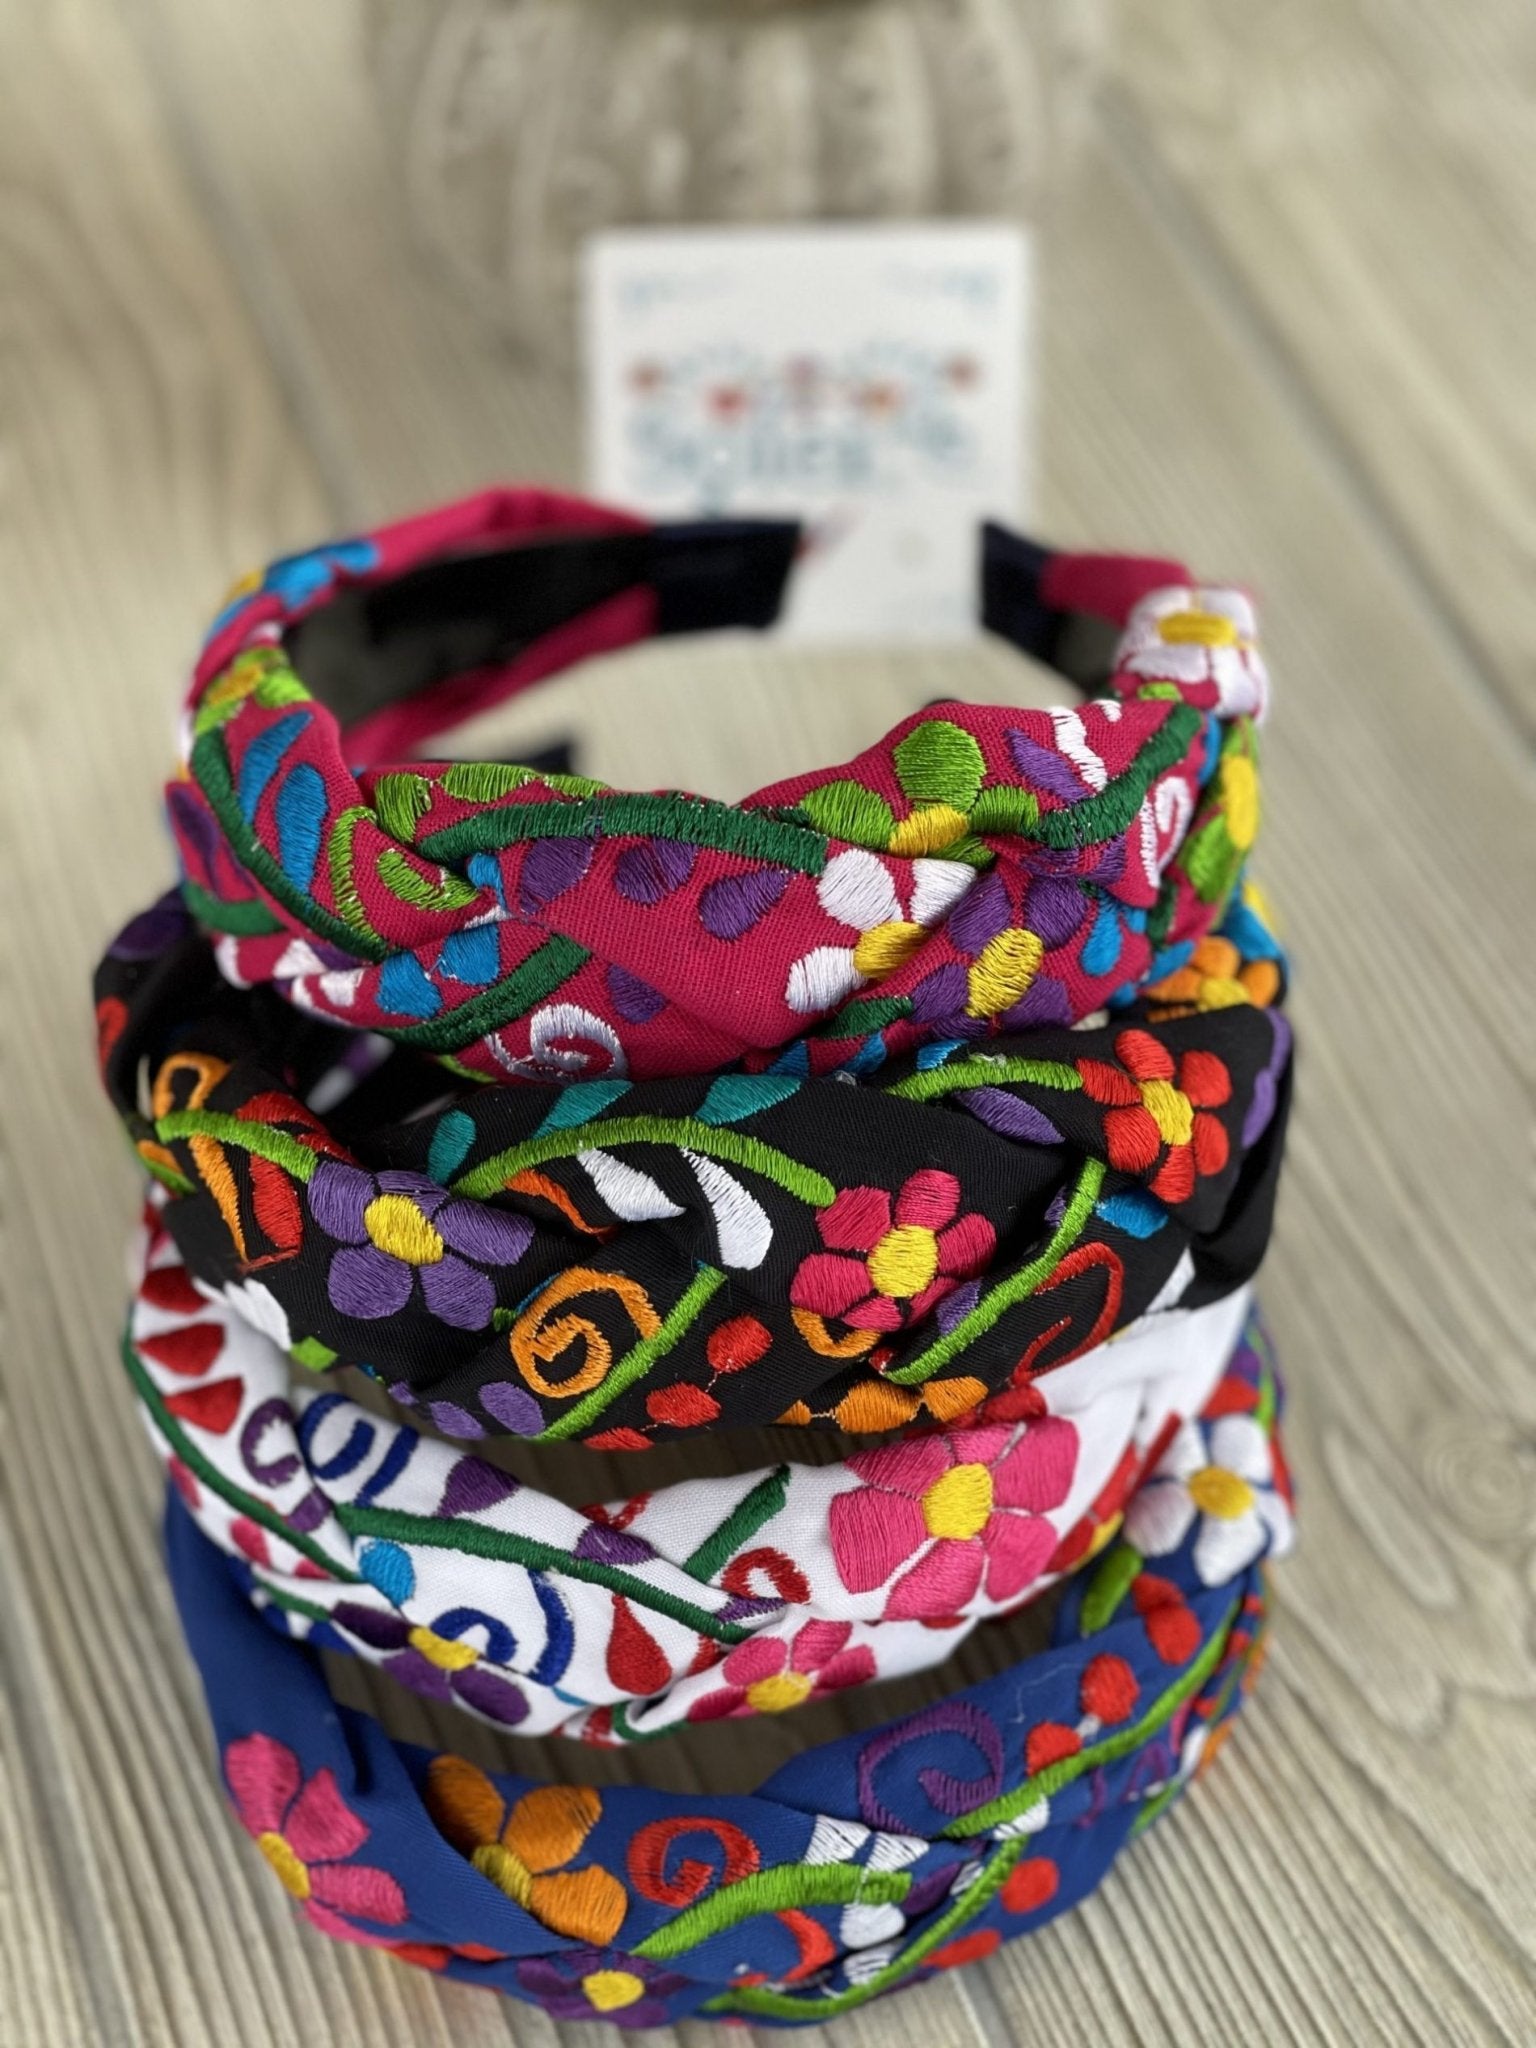 Braided Mexican Headband. Artisanal Mexican Headband. Floral Embroidered Headband. - Solei Store